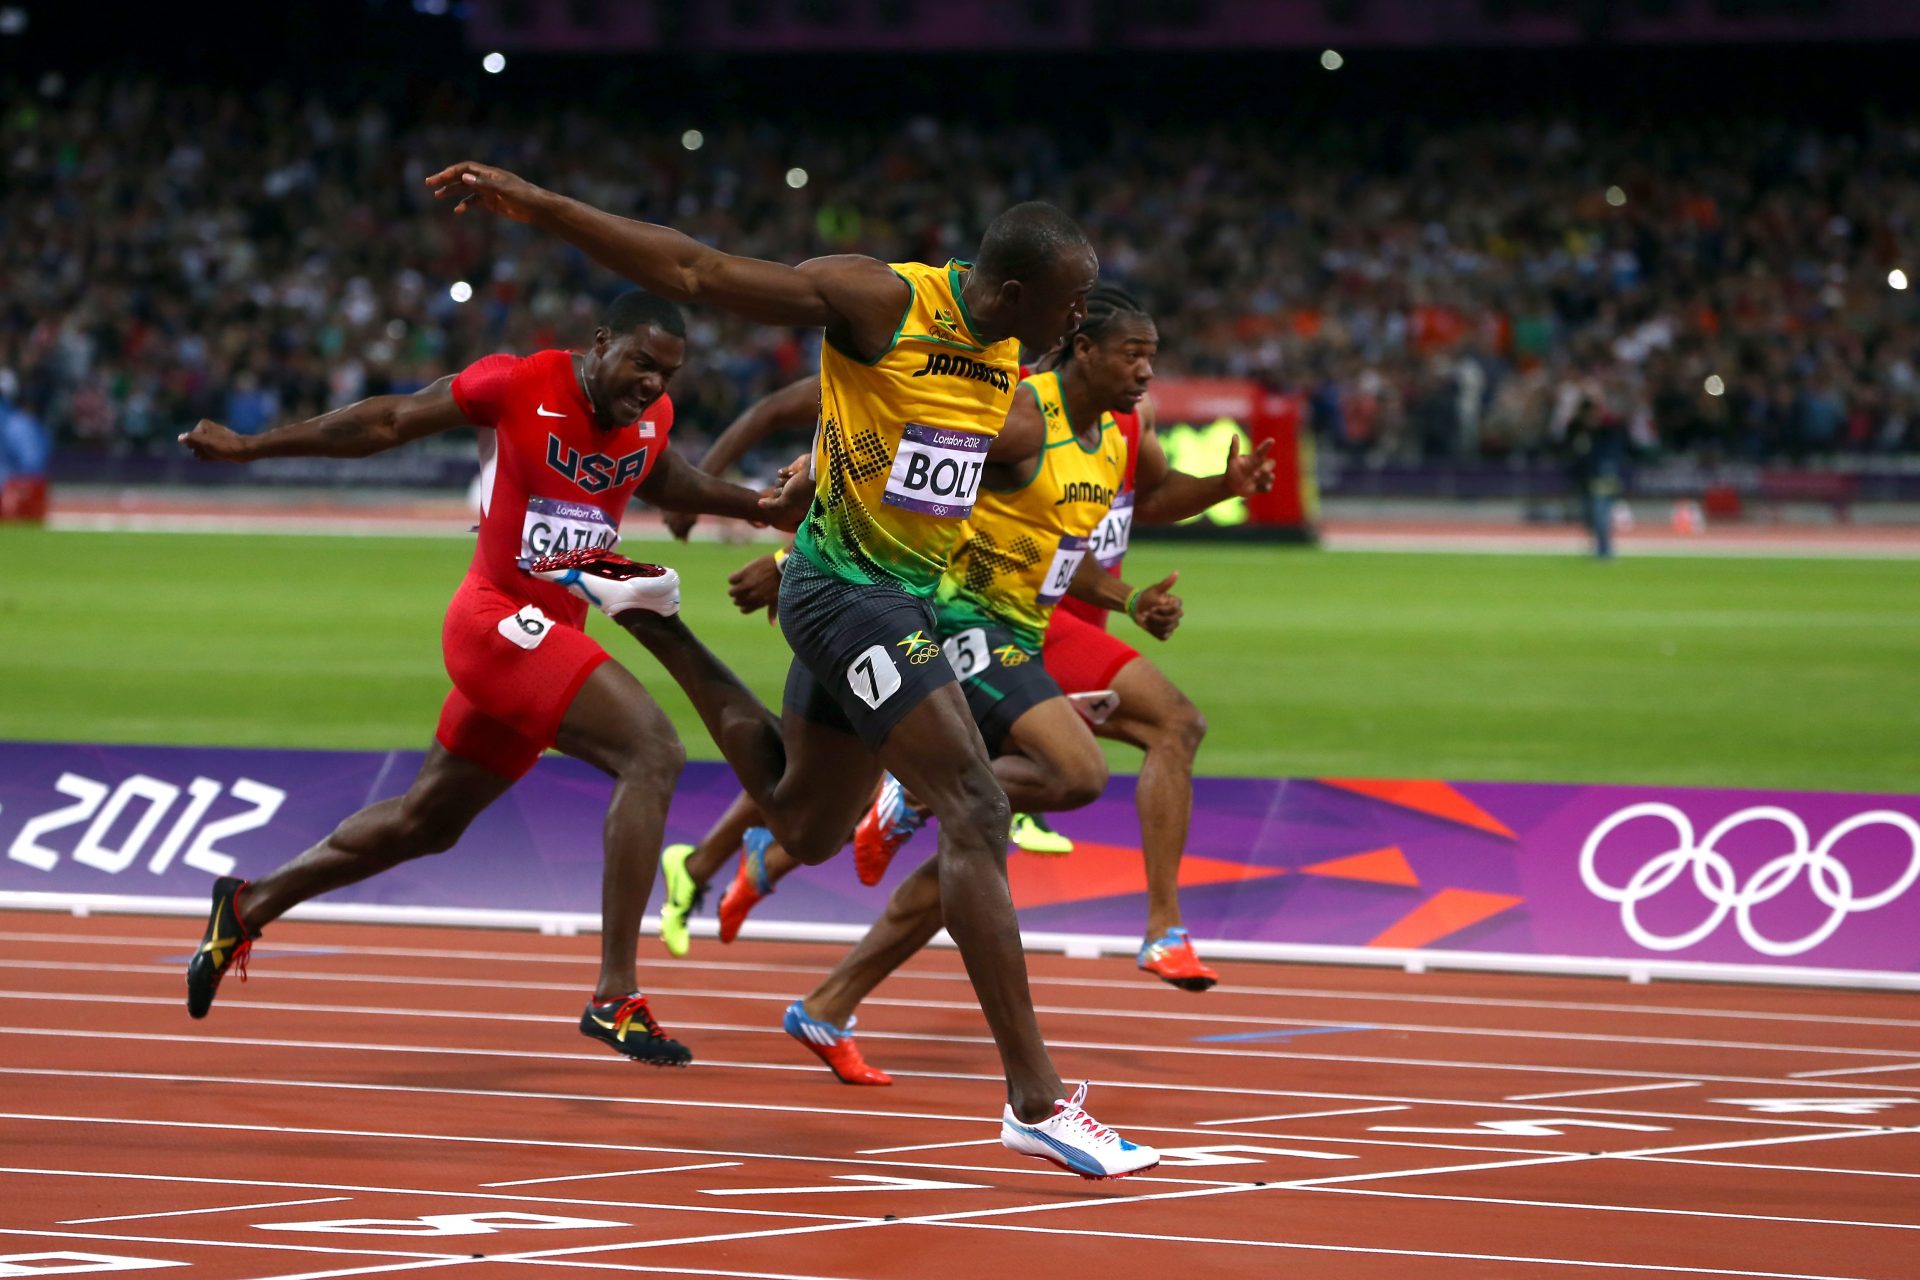 The 10 fastest men in the history of the 100 meters